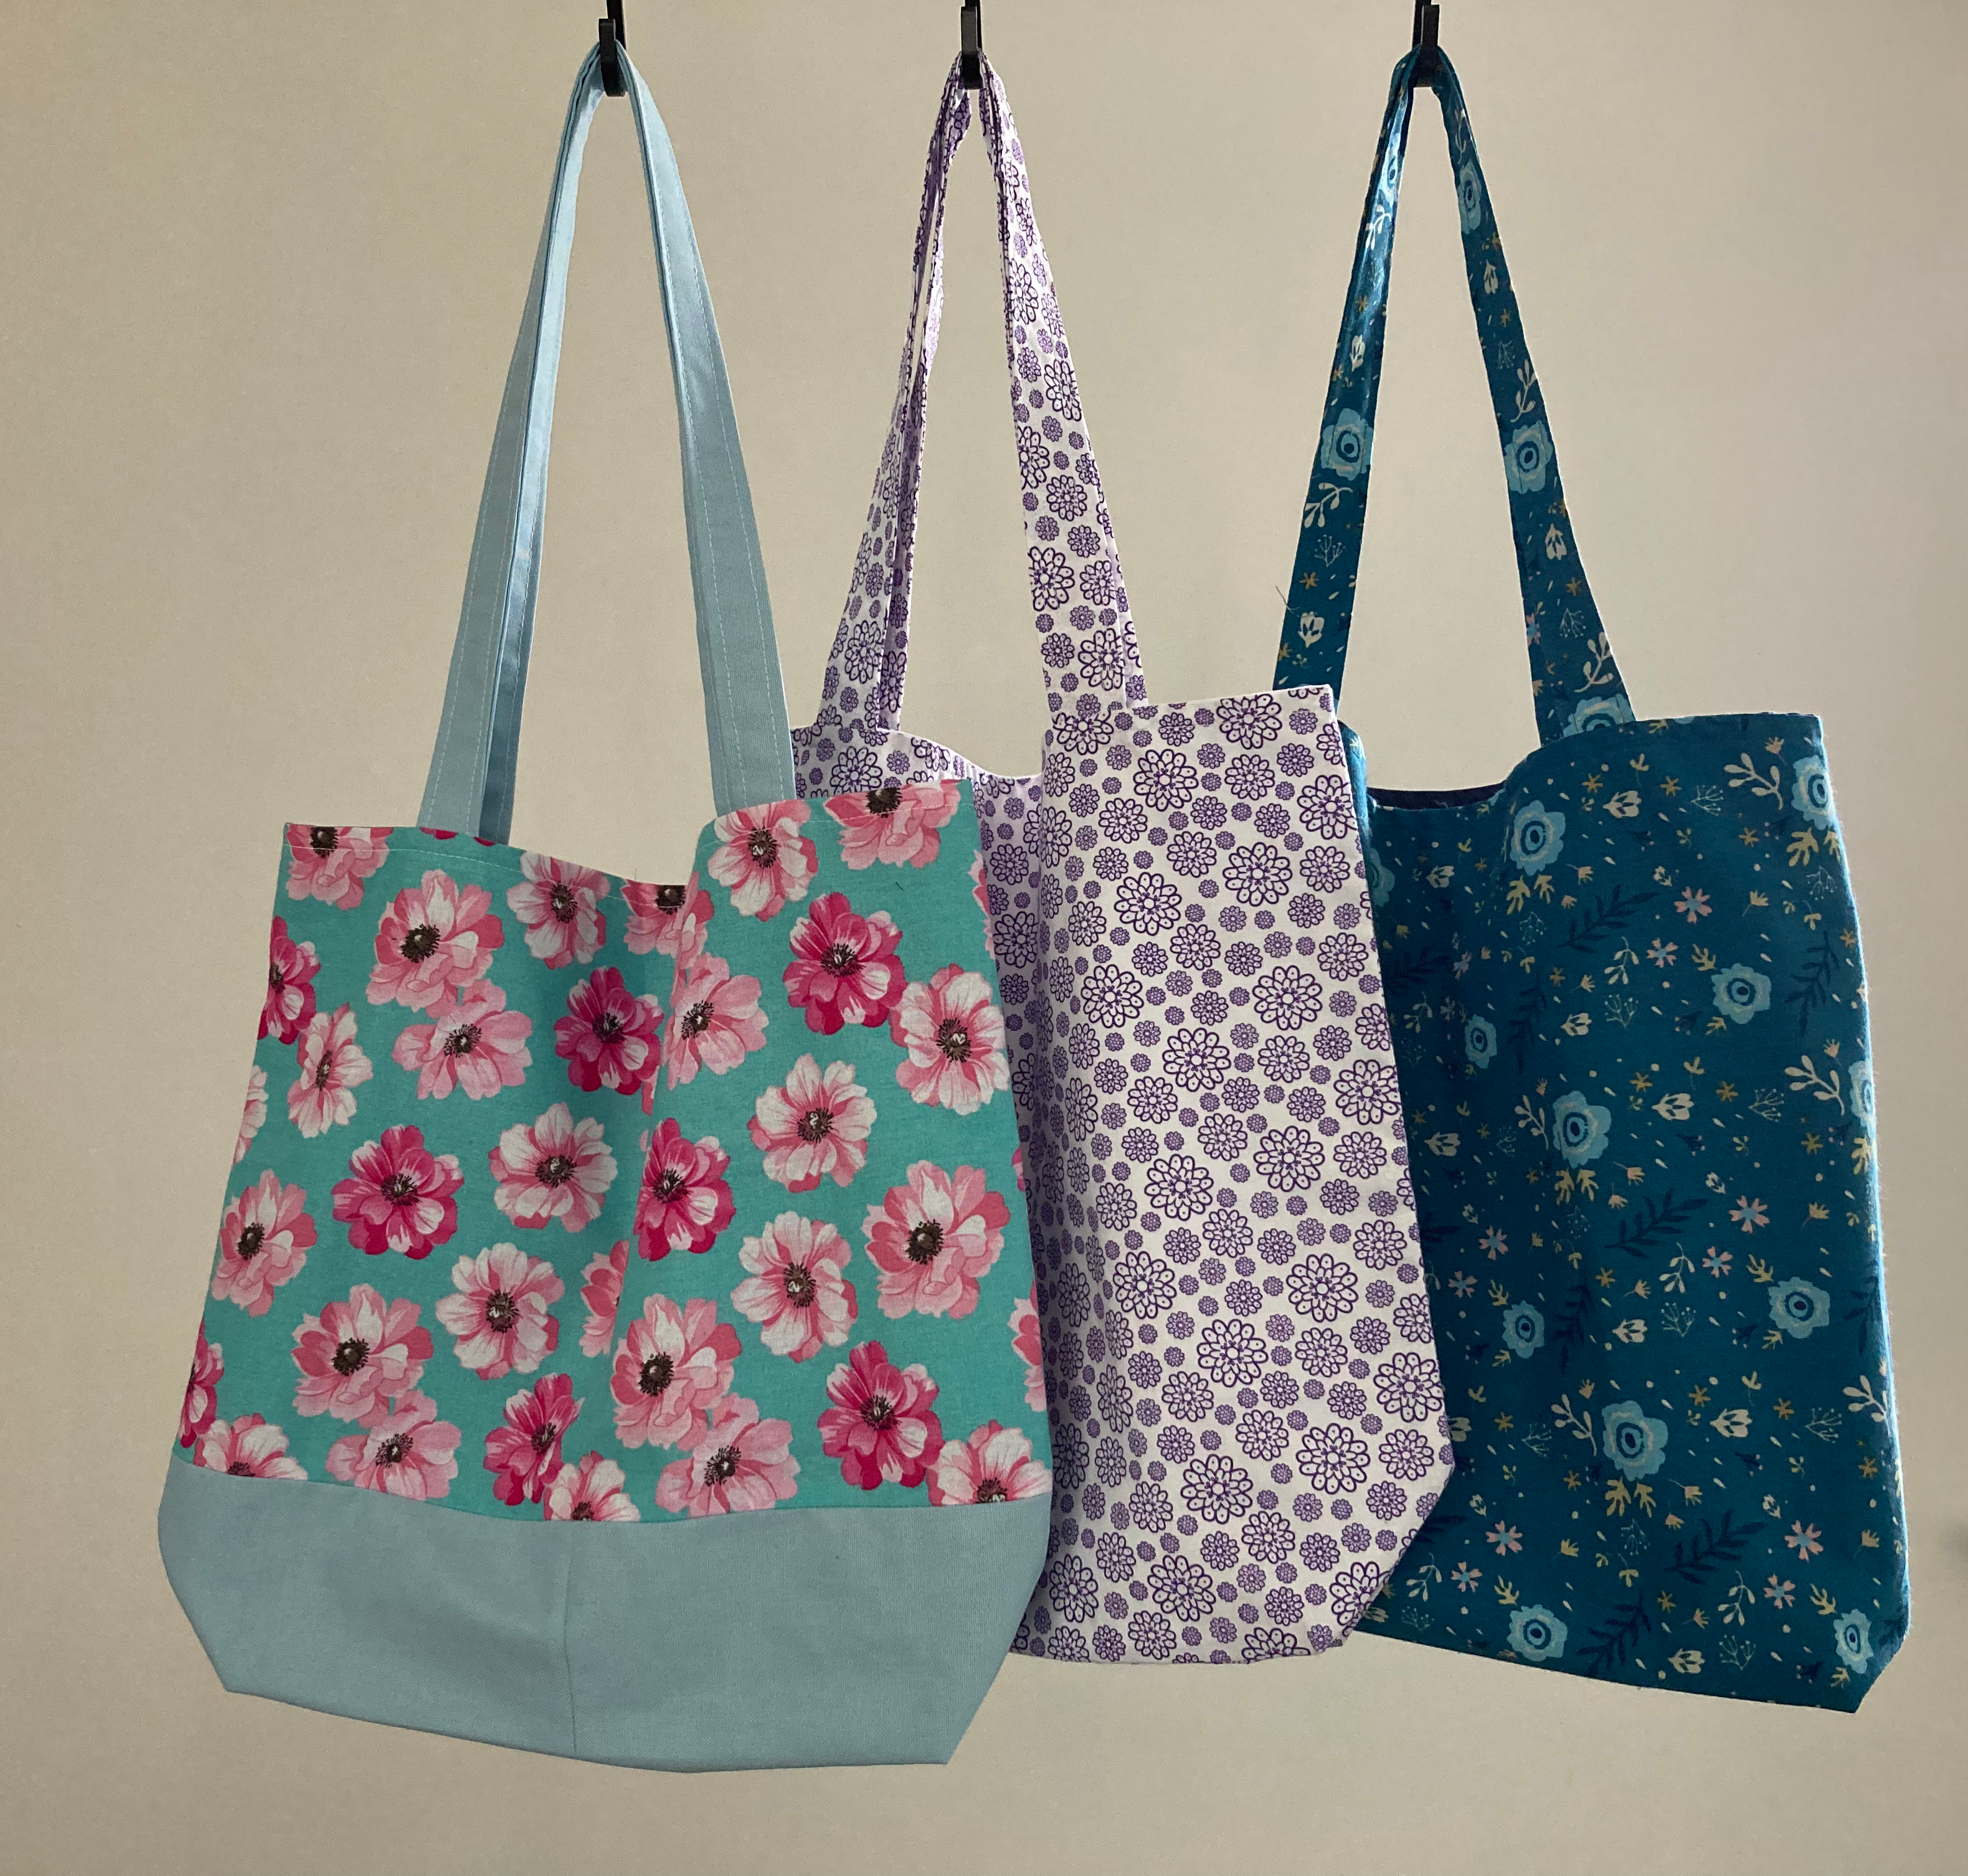 Get Ready to Shop Our New Collection of Stylish and Sustainable Handmade Tote Bags